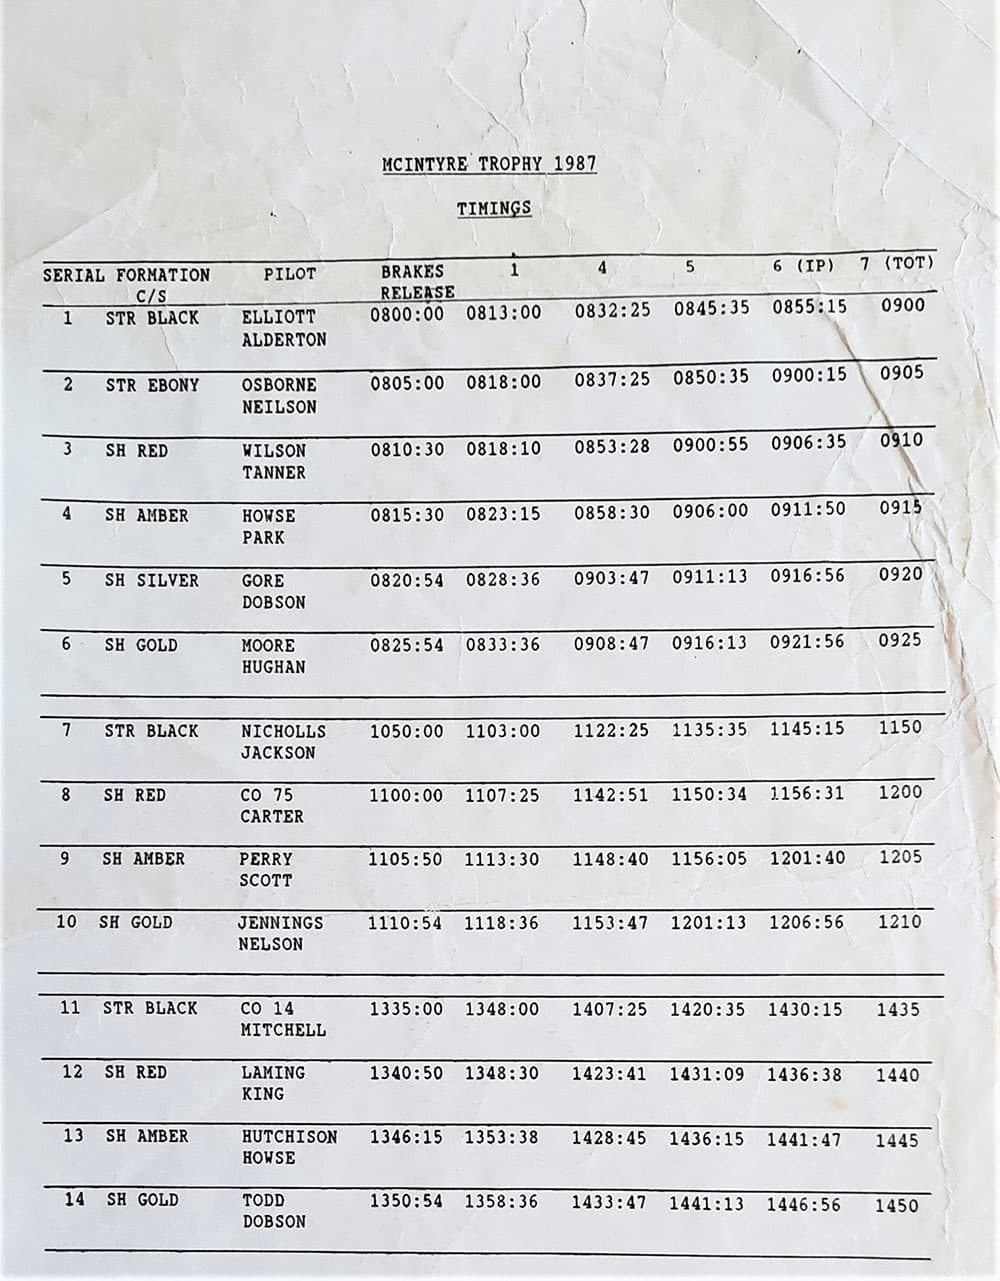 1987 McIntyre Trophy – Pilots, Takeoff times, Turning Point and TOT timings